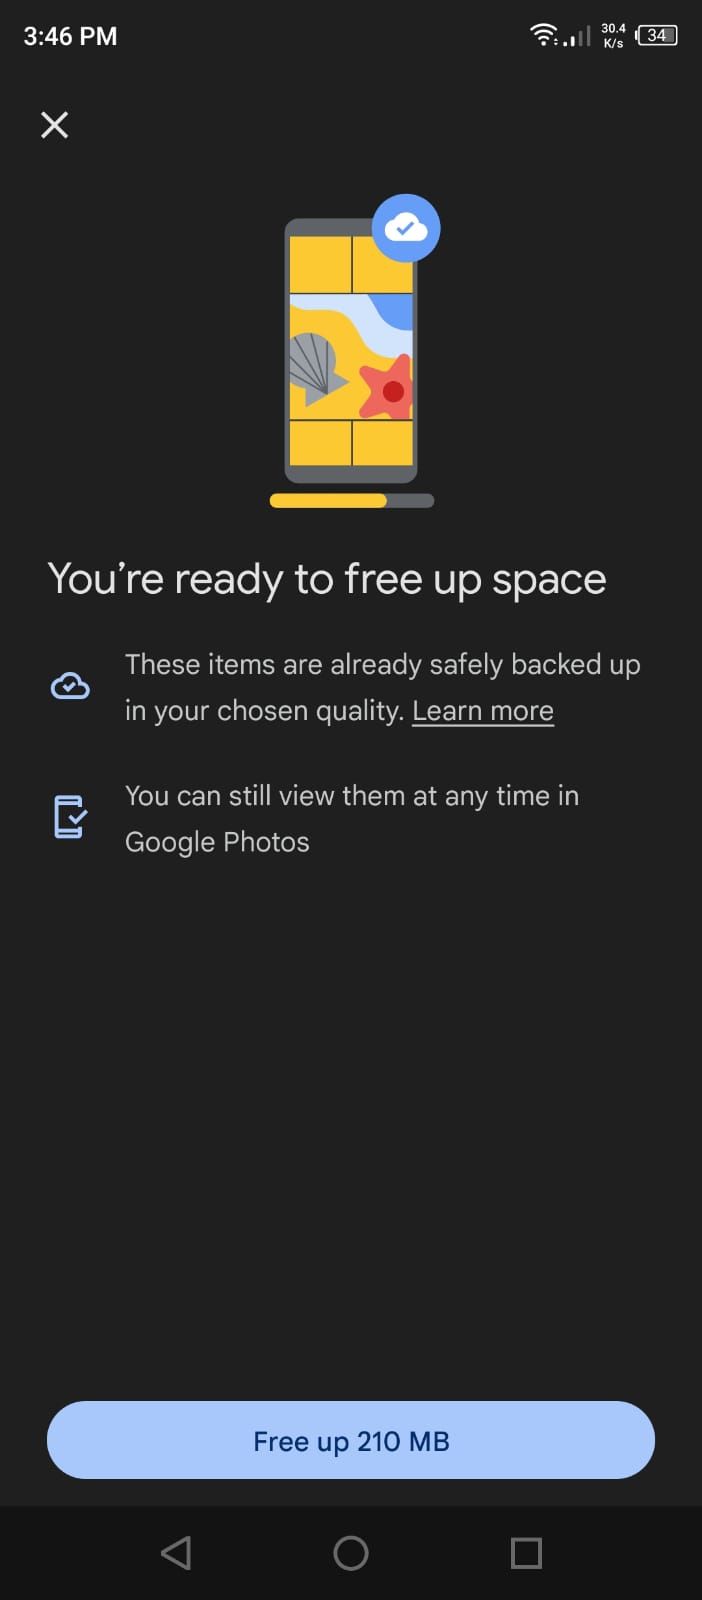 Google Photos App - Space Freed Up